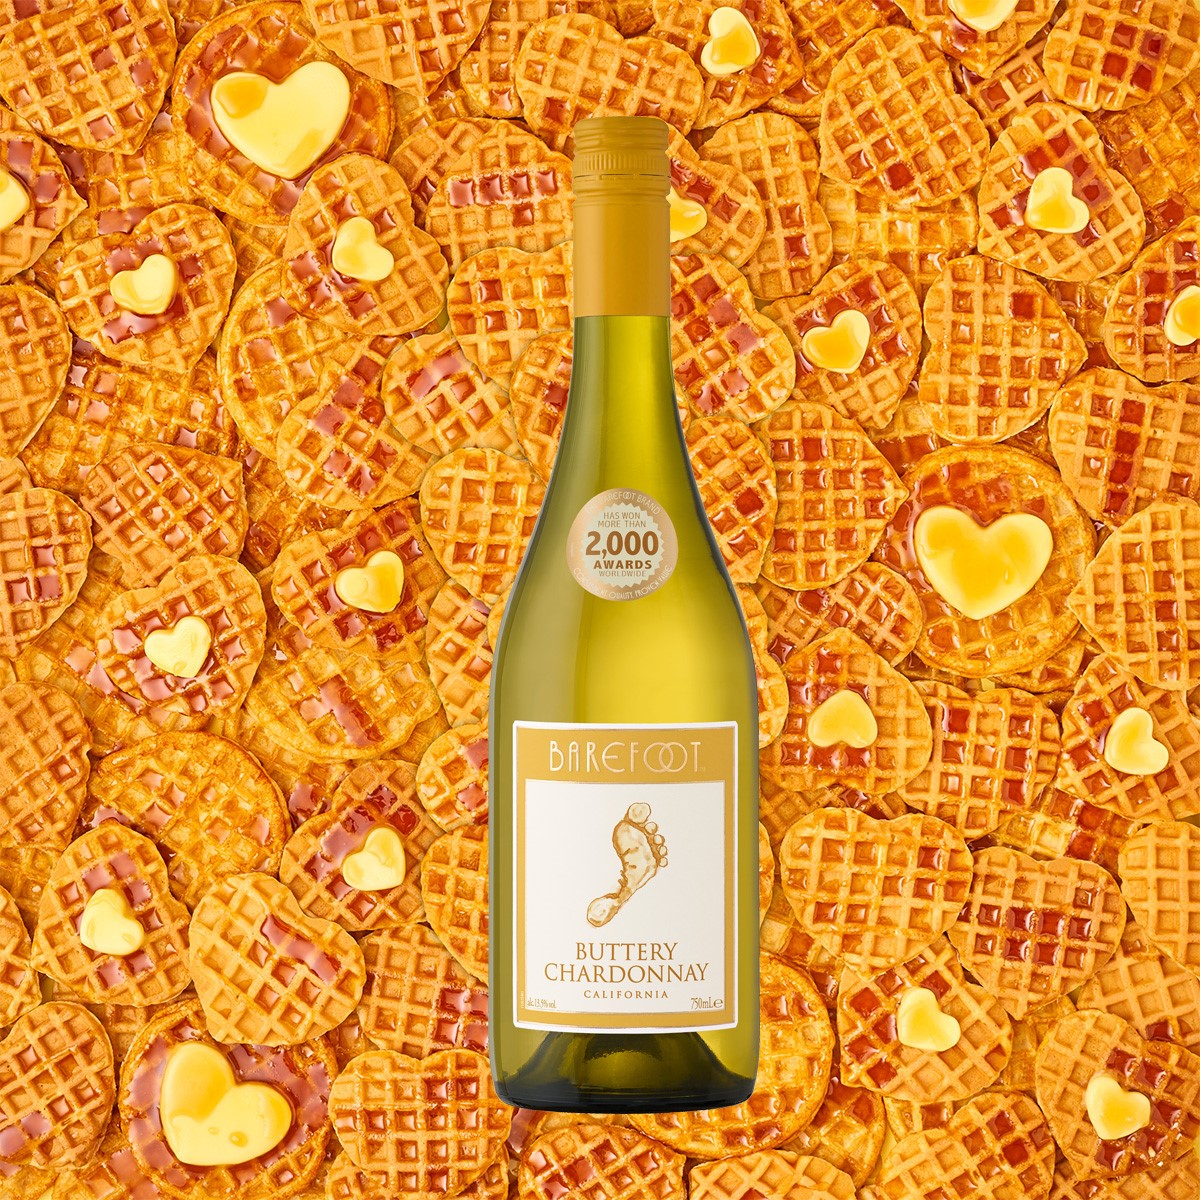 Barefoot rolls out Buttery Chardonnay